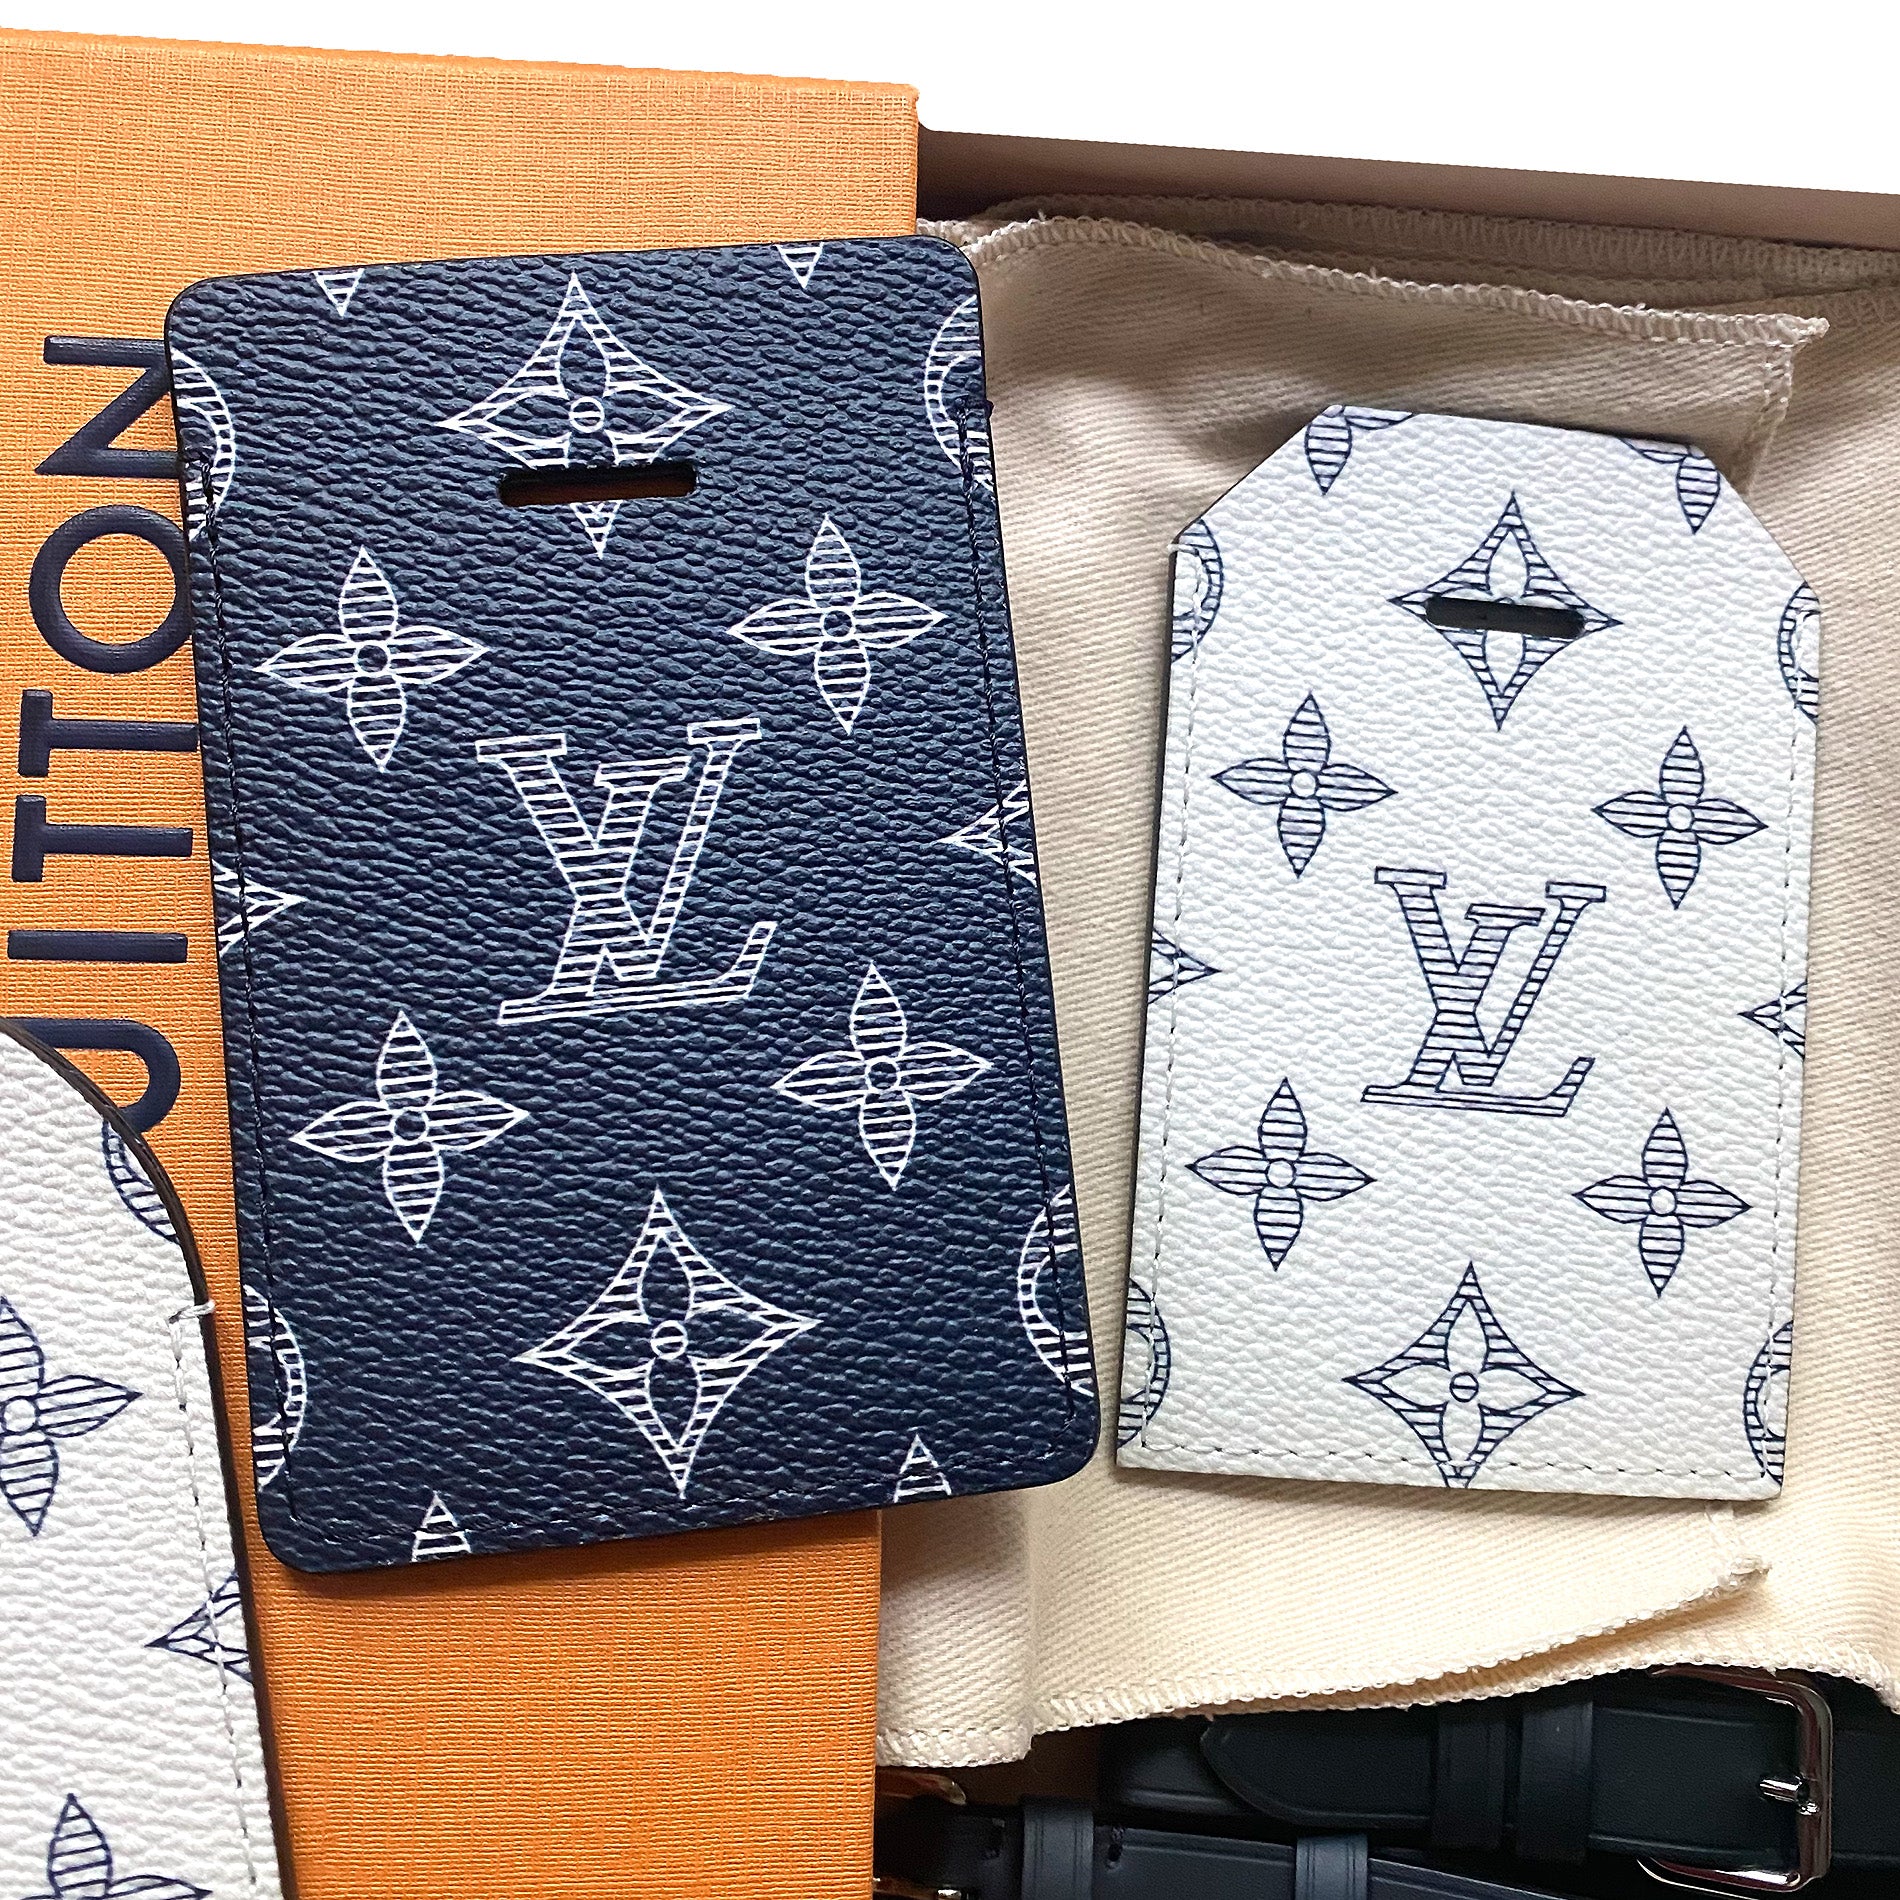 Louis Vuitton X Chapman Brothers Reveal #2 * Luggage Tags * 